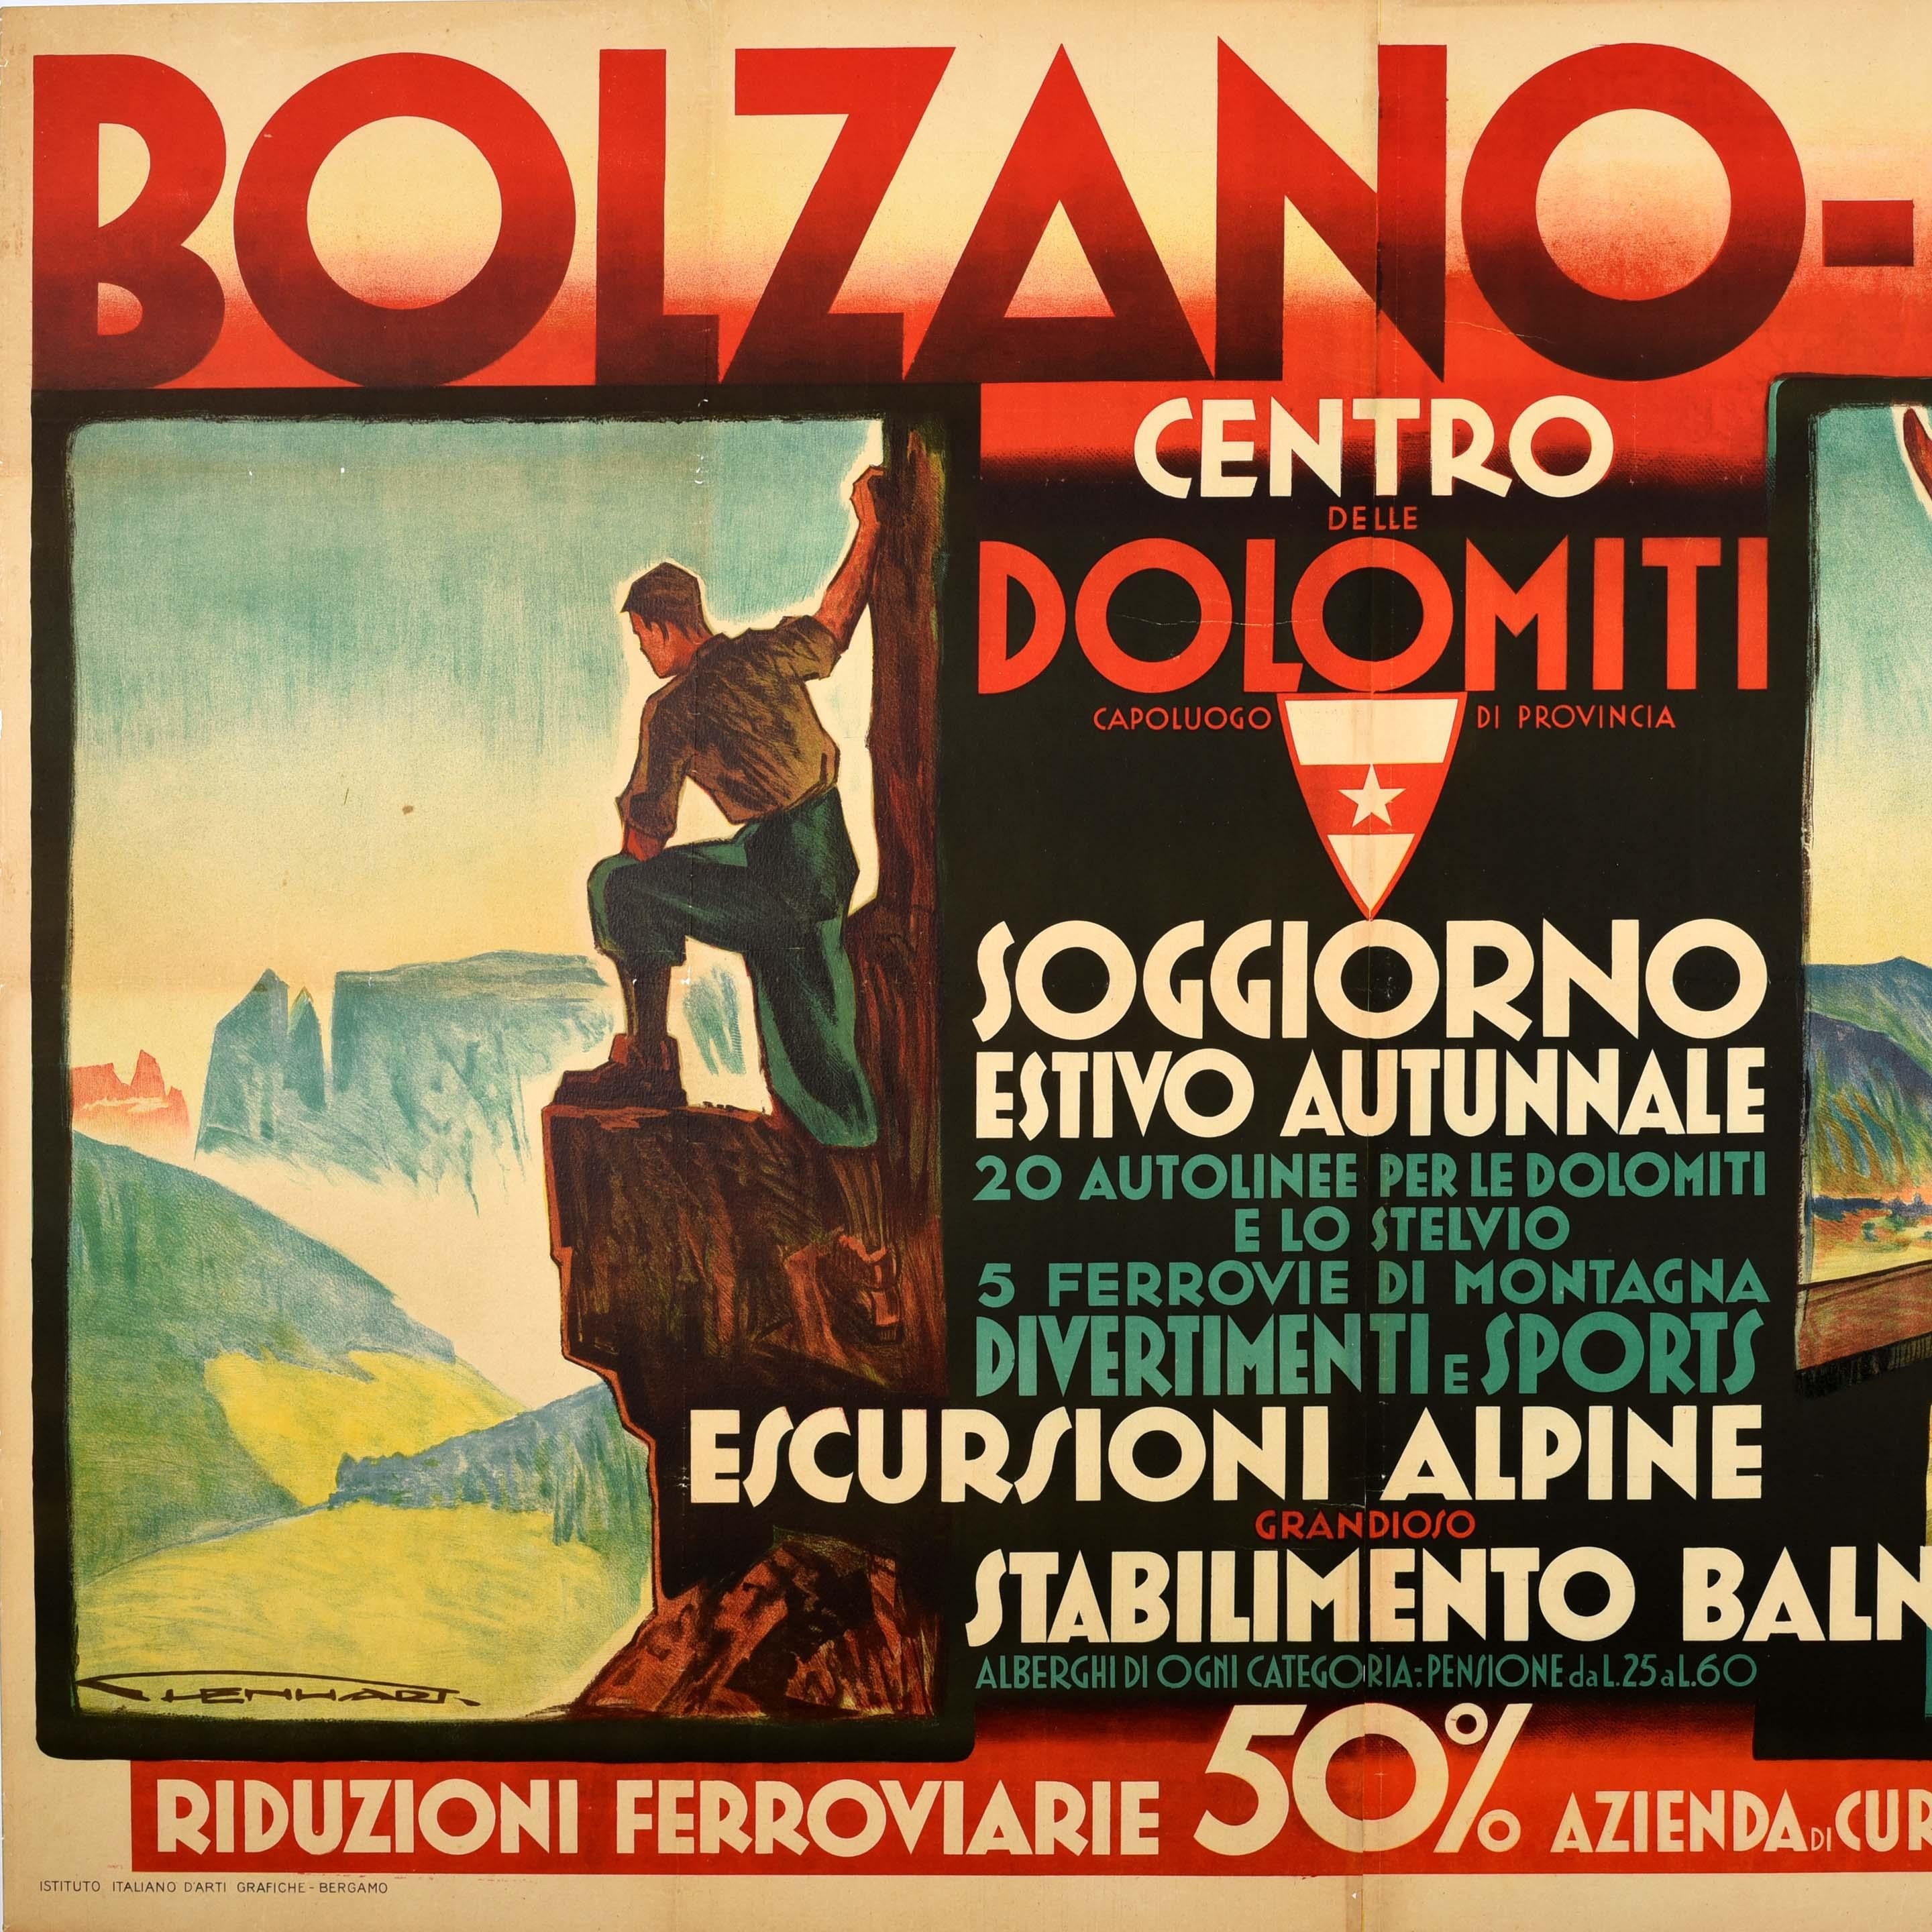 Original vintage Italy travel poster for Bolzano-Gries Centro Delle Dolomiti / Bolzano Gries Centre of the Dolomites featuring stunning artwork by Franz Lenhart (1898-1992) depicting a man hiking and climbing up a rocky mountain on one side, looking